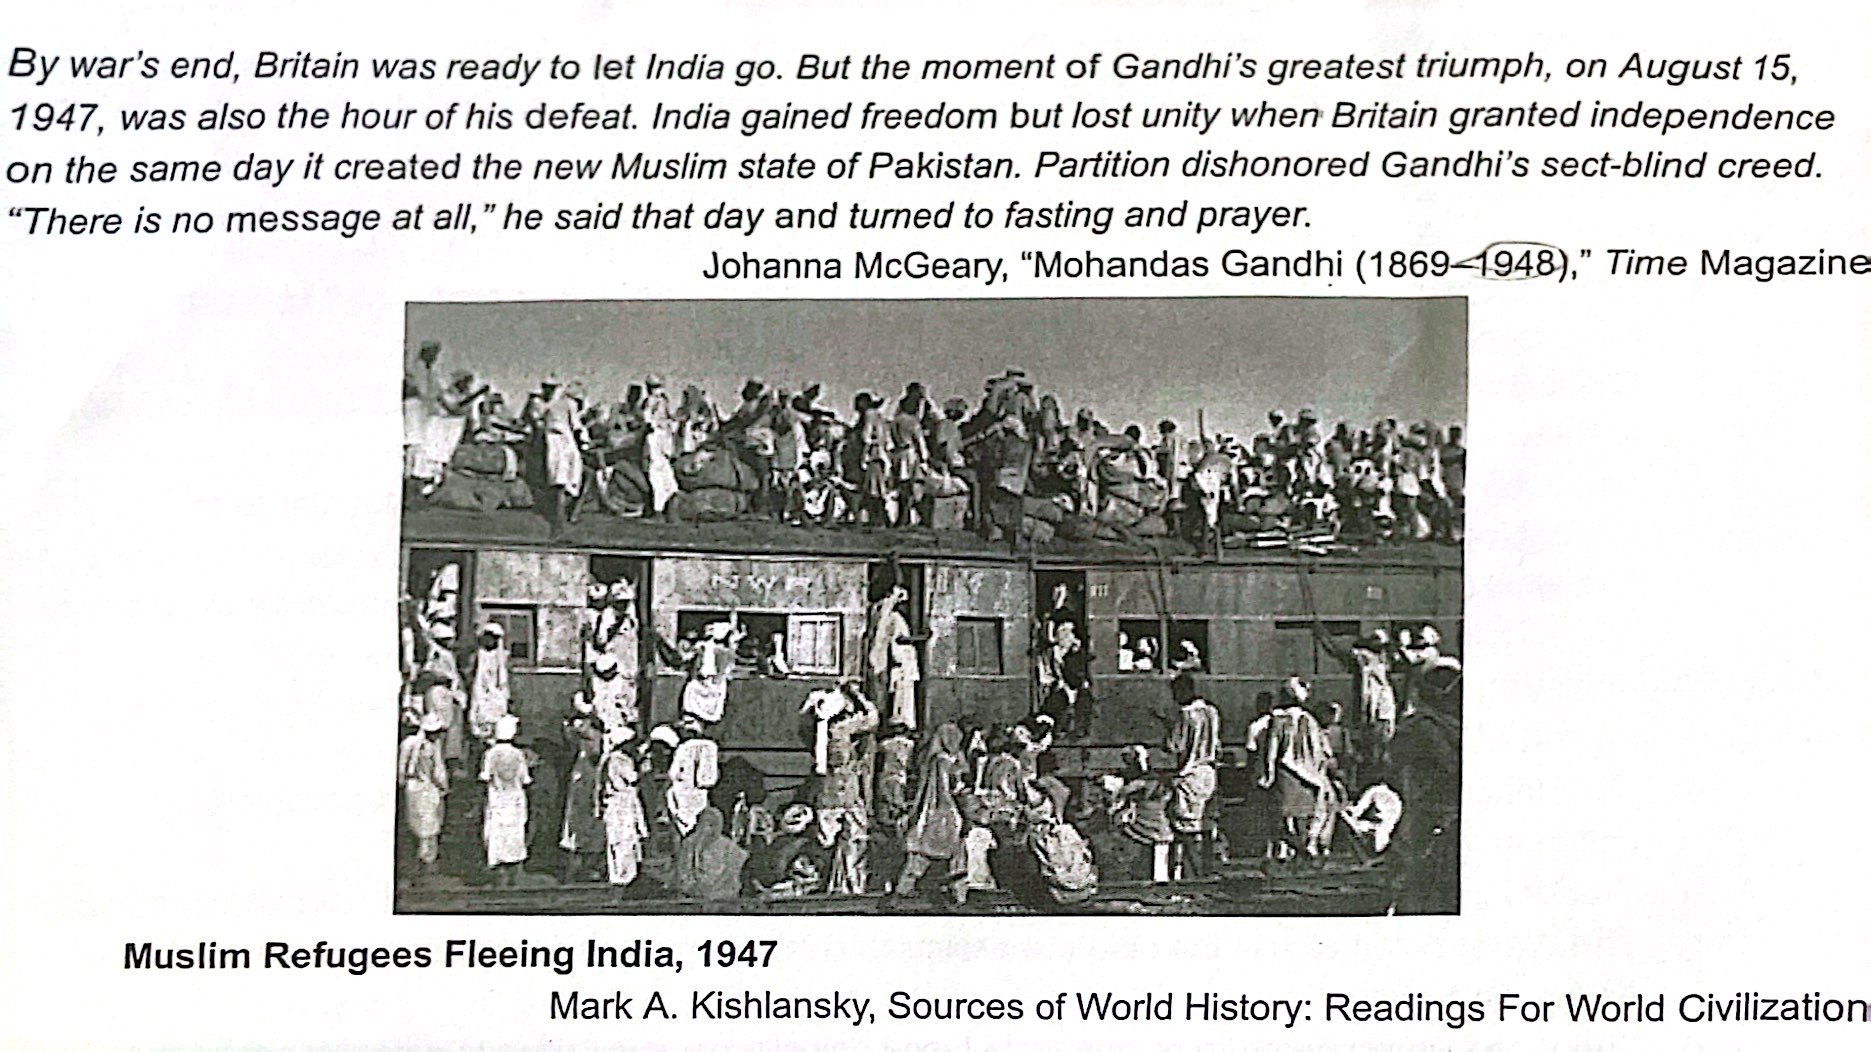 <p><strong>14-1.</strong> How did Gandhi win Indian independence from Britain?</p><p>a) By siding with Japan during World War II<br>b) With decades of non-violent resistance and civil disobedience<br>c) By cleverly playing Muslims against Hindus<br>d) With major financial support from the Soviet Union</p>